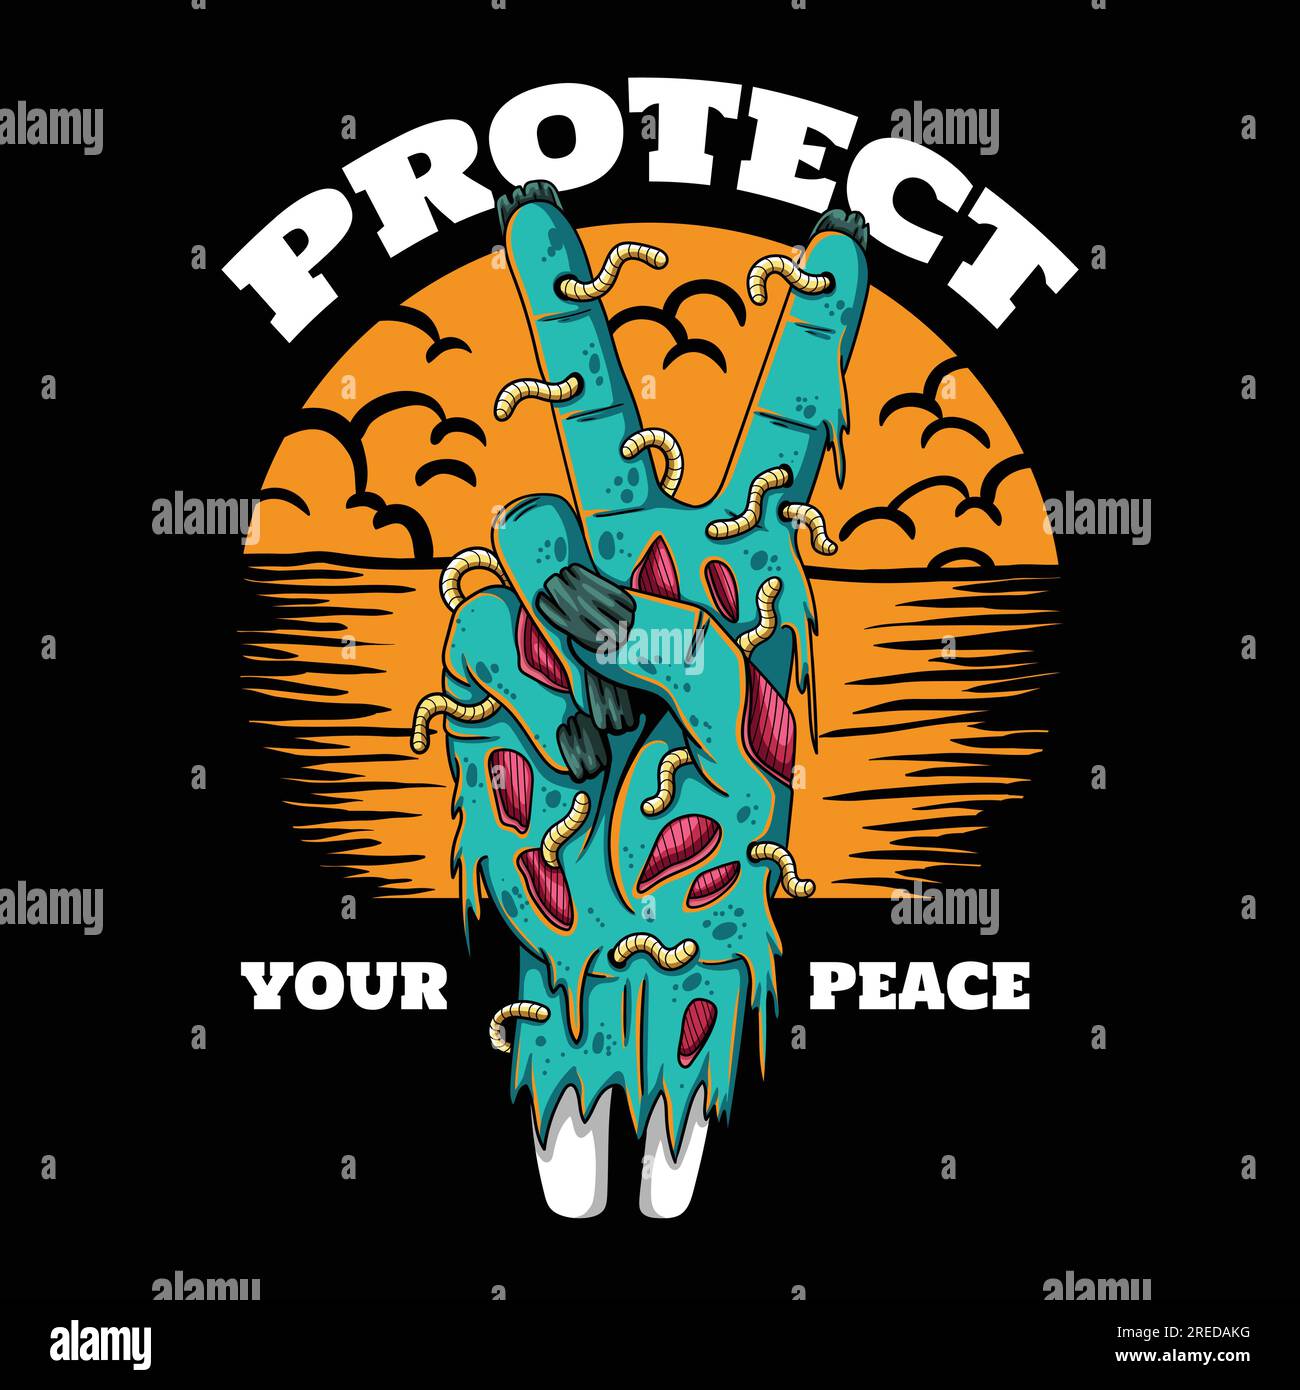 Hand zombie peace sign vector illustration for your company or brand Stock Vector